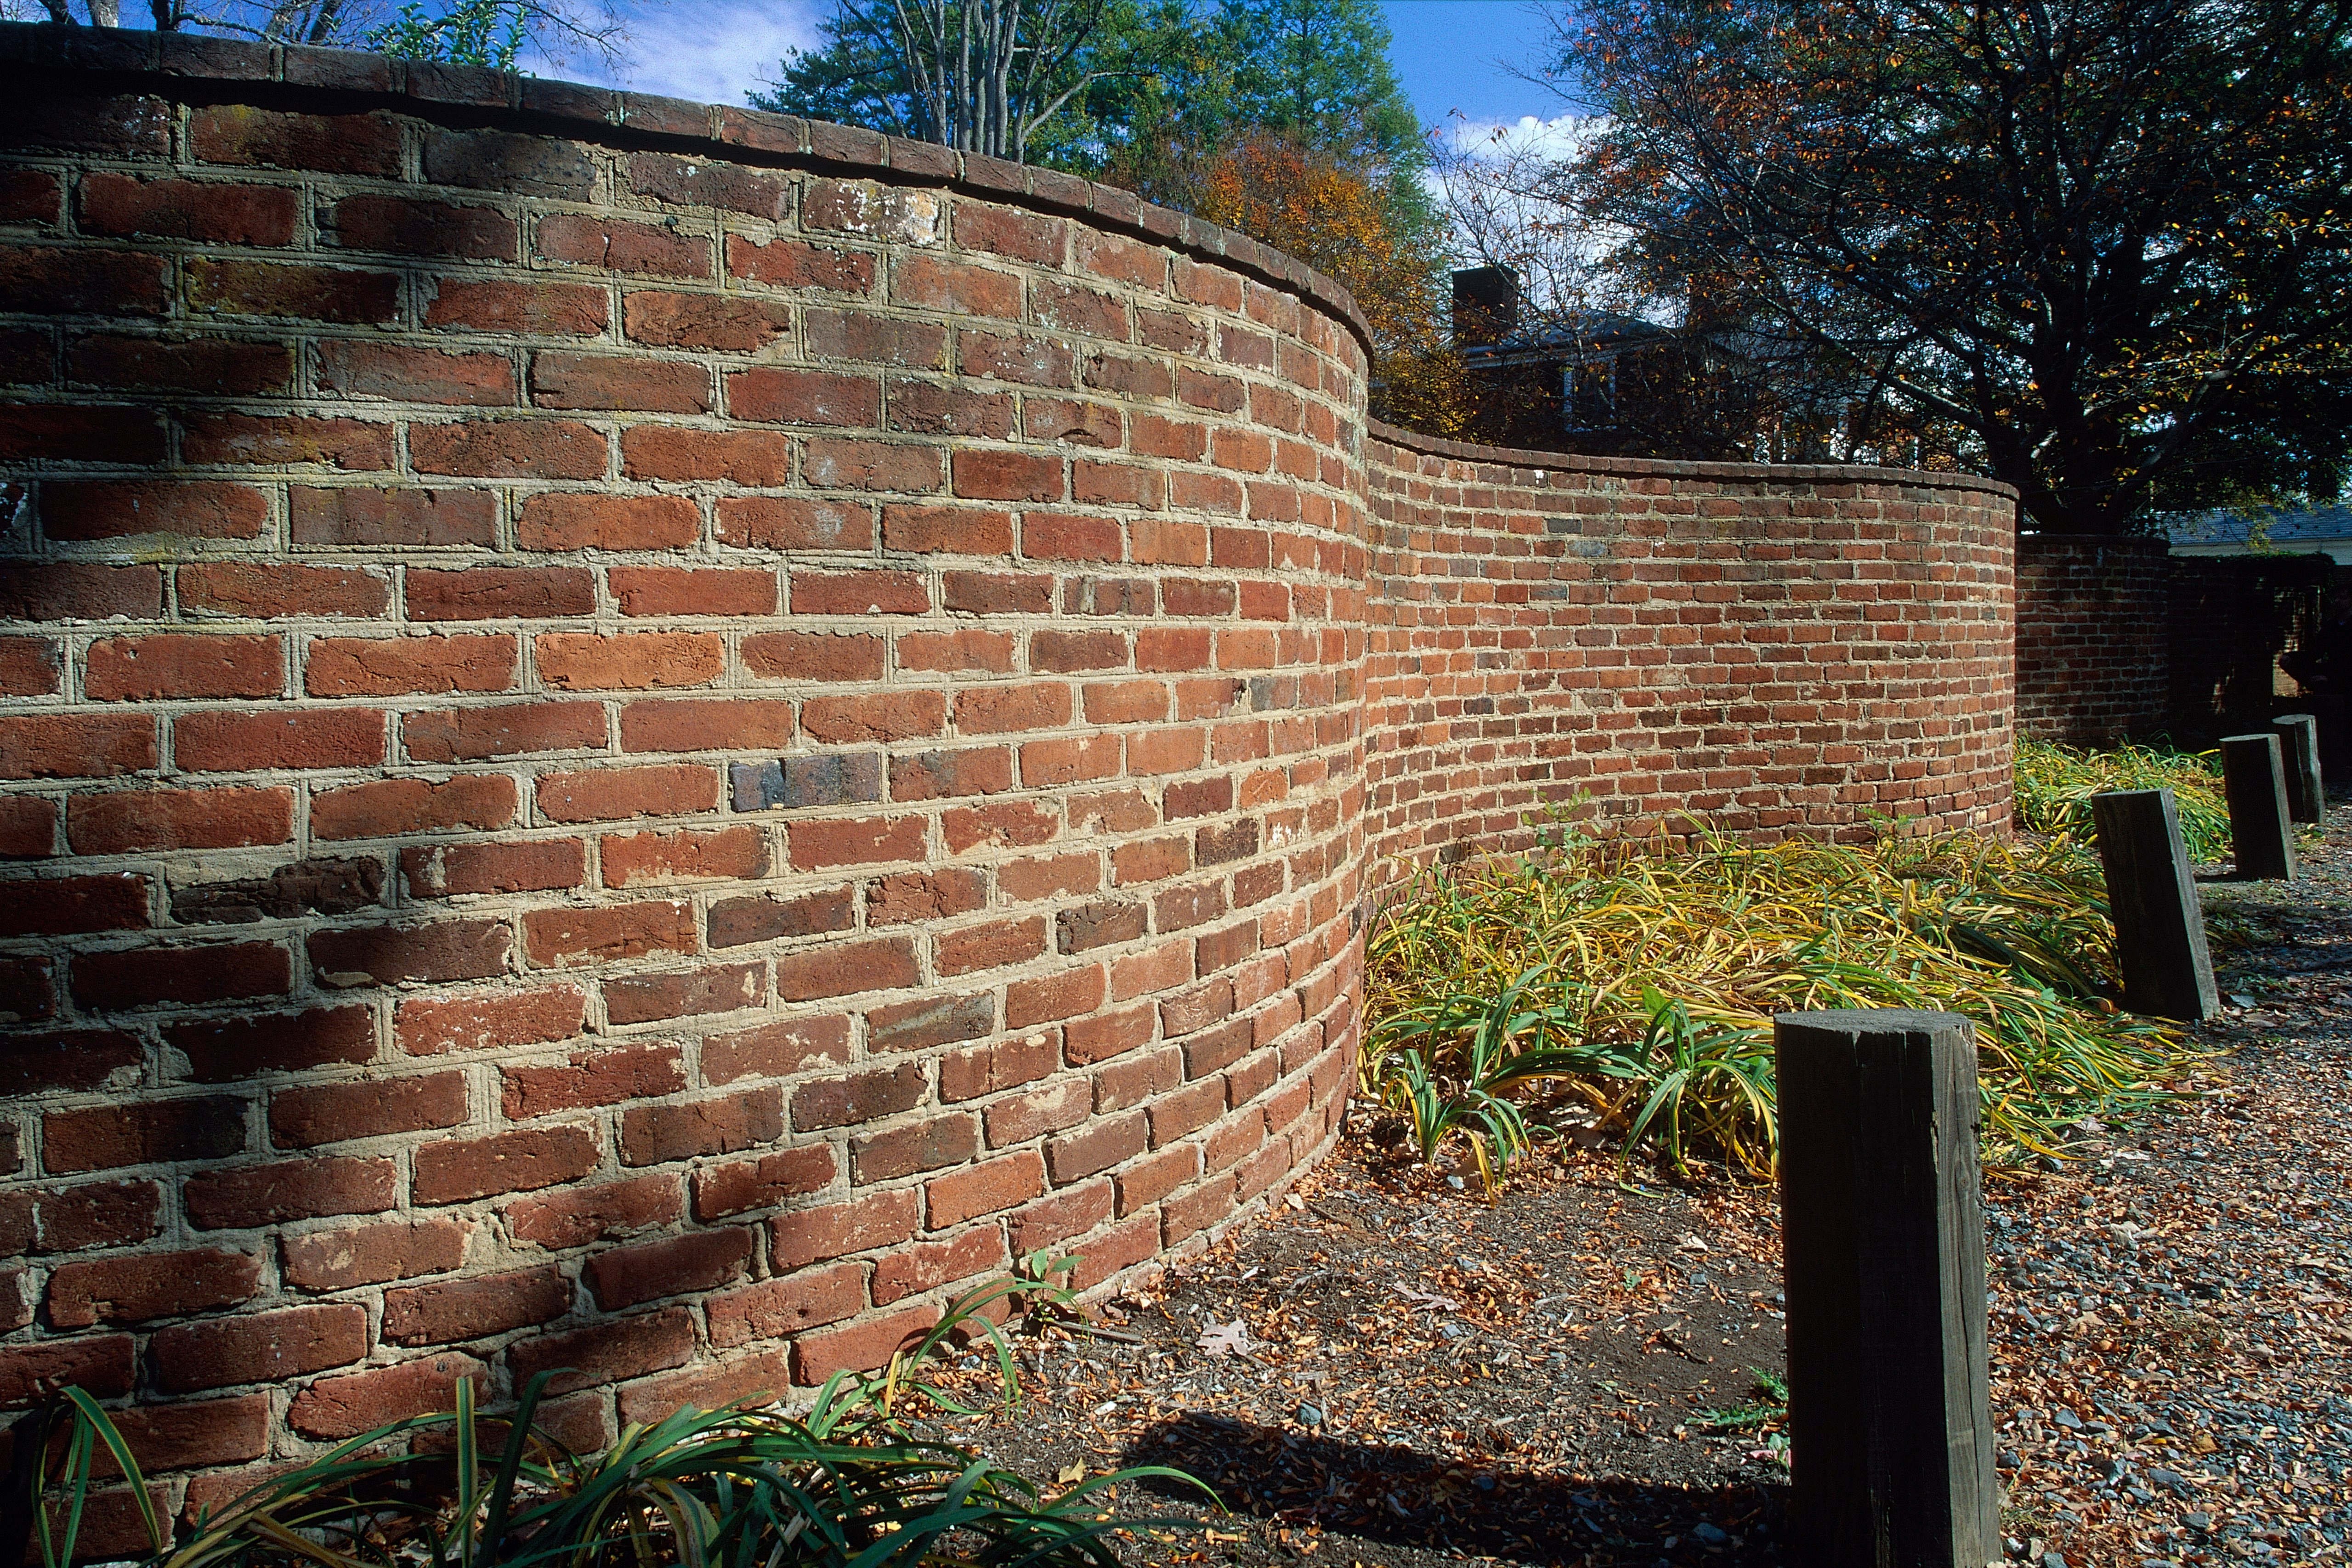 Serpentine crinkle crankle brick wall at the University of Virginia, USA.